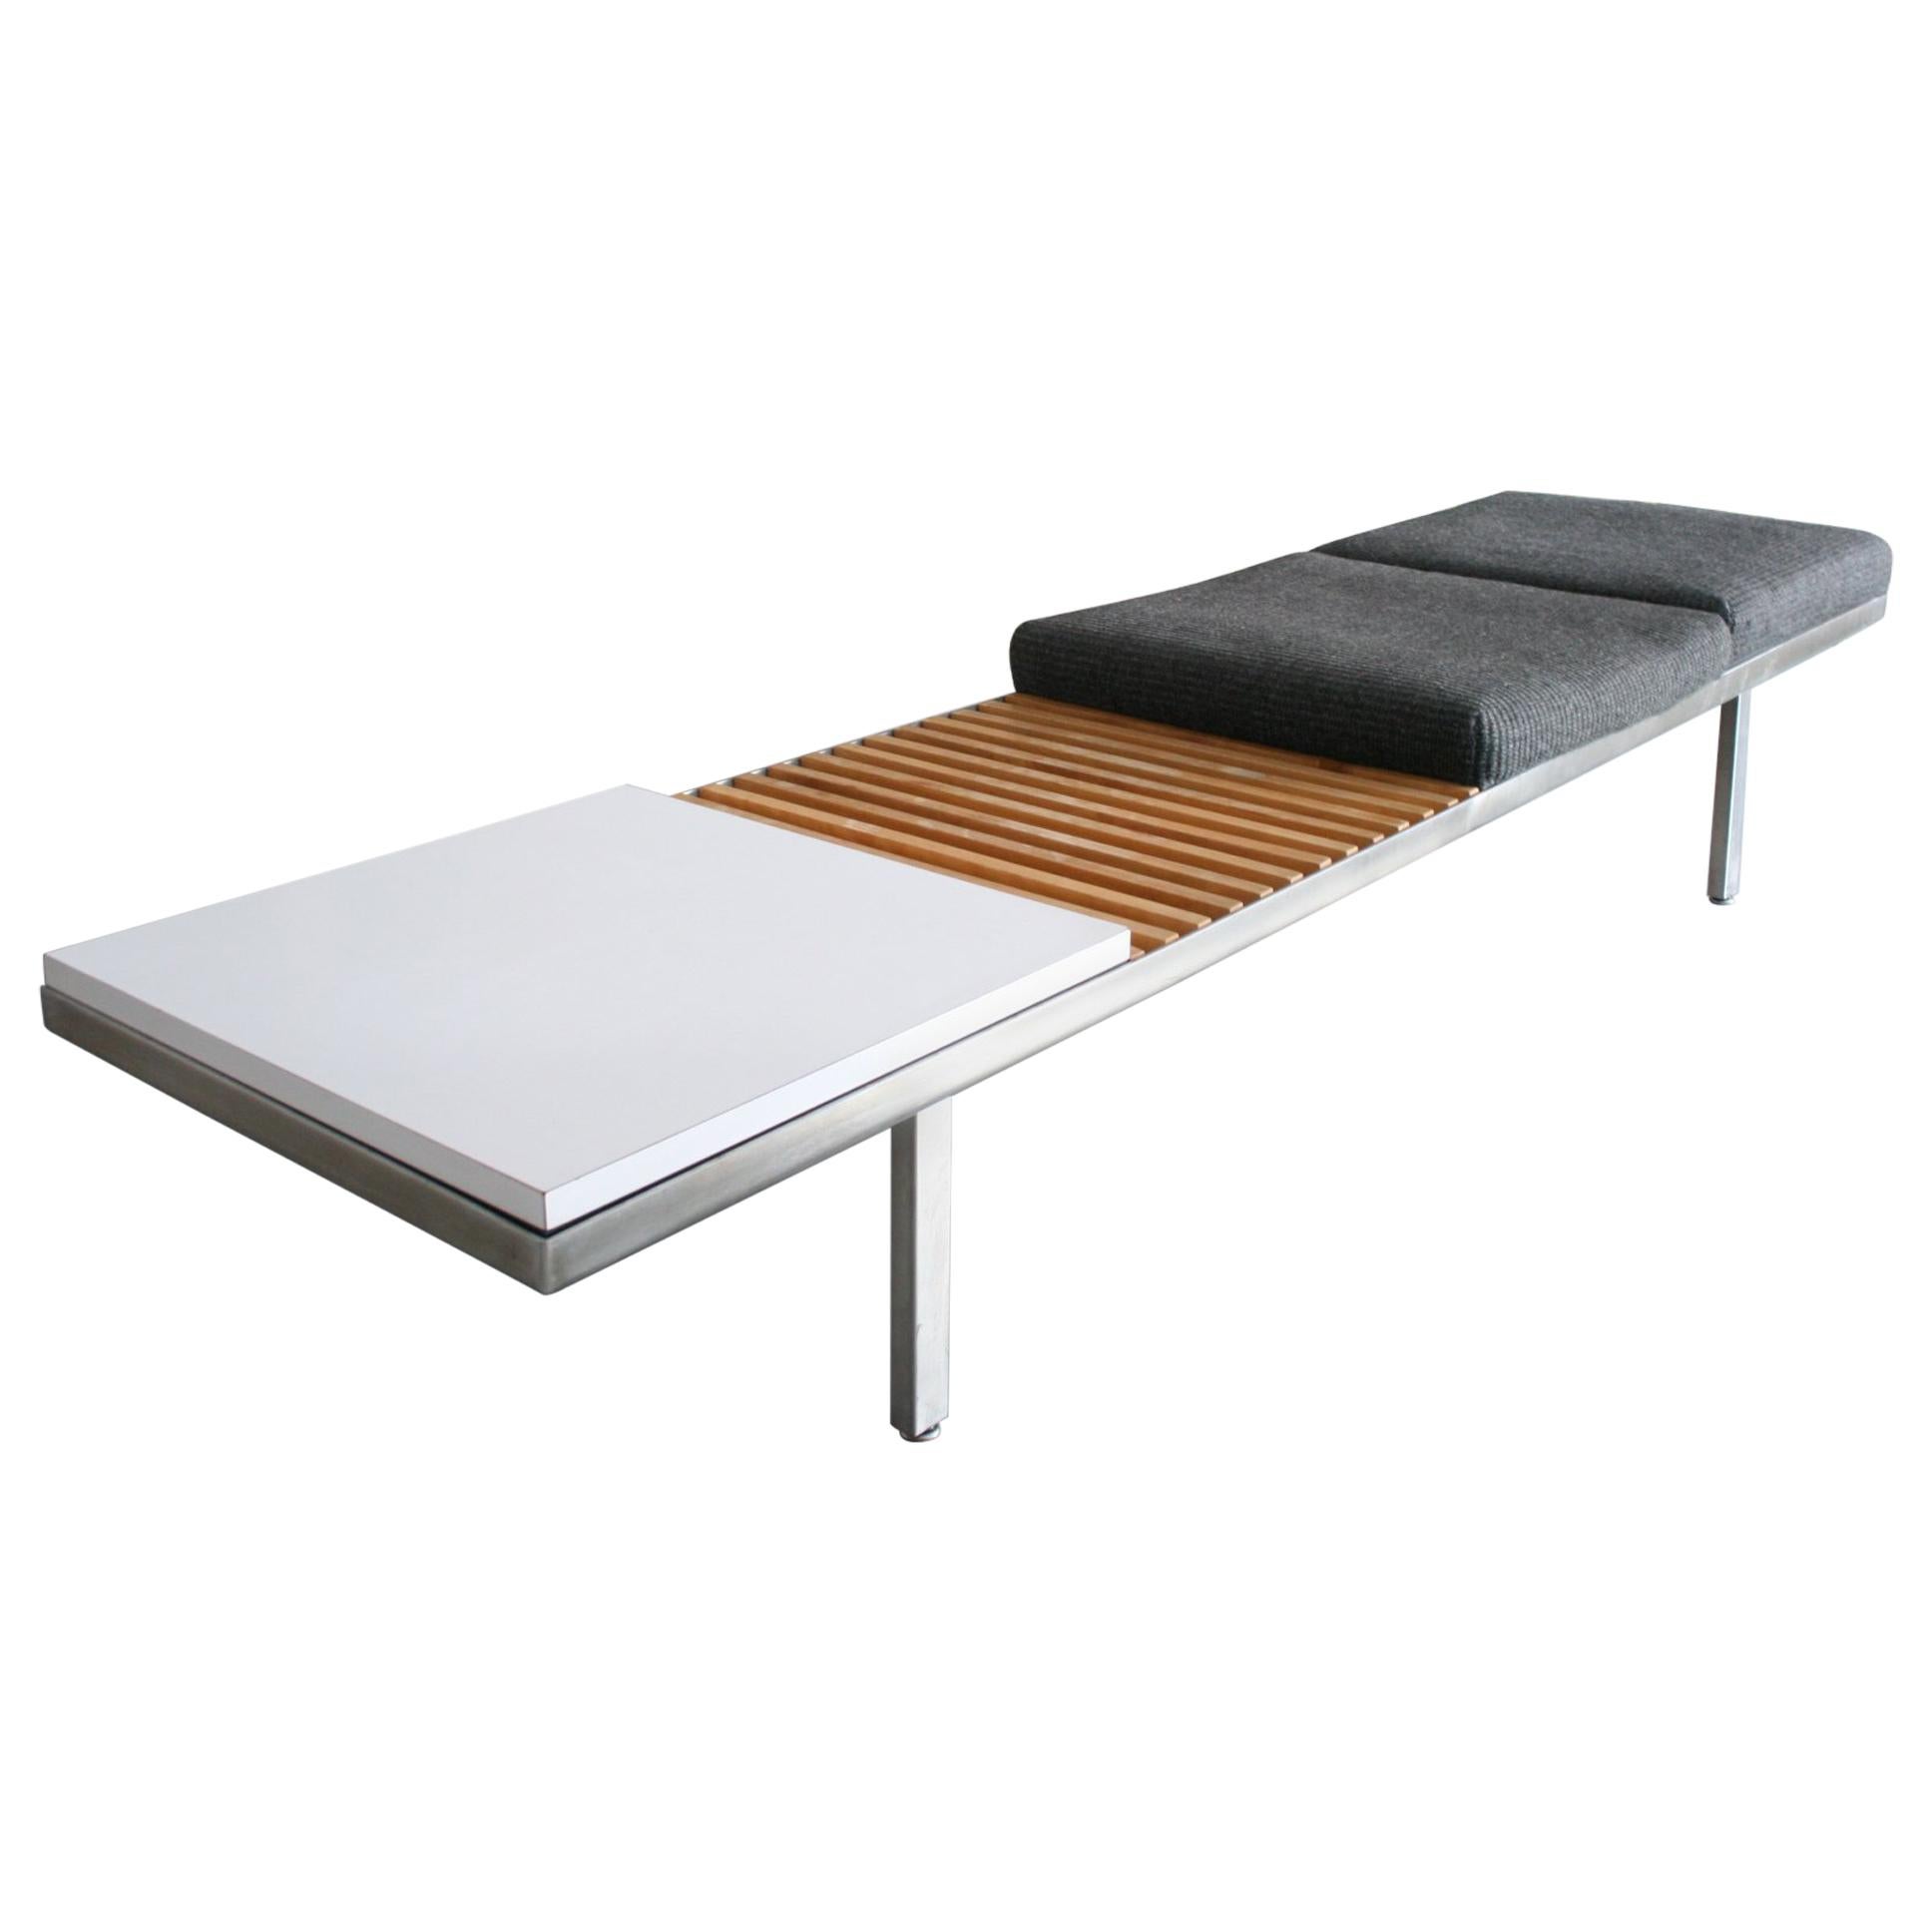 Modular Bench by George Nelson for Herman Miller